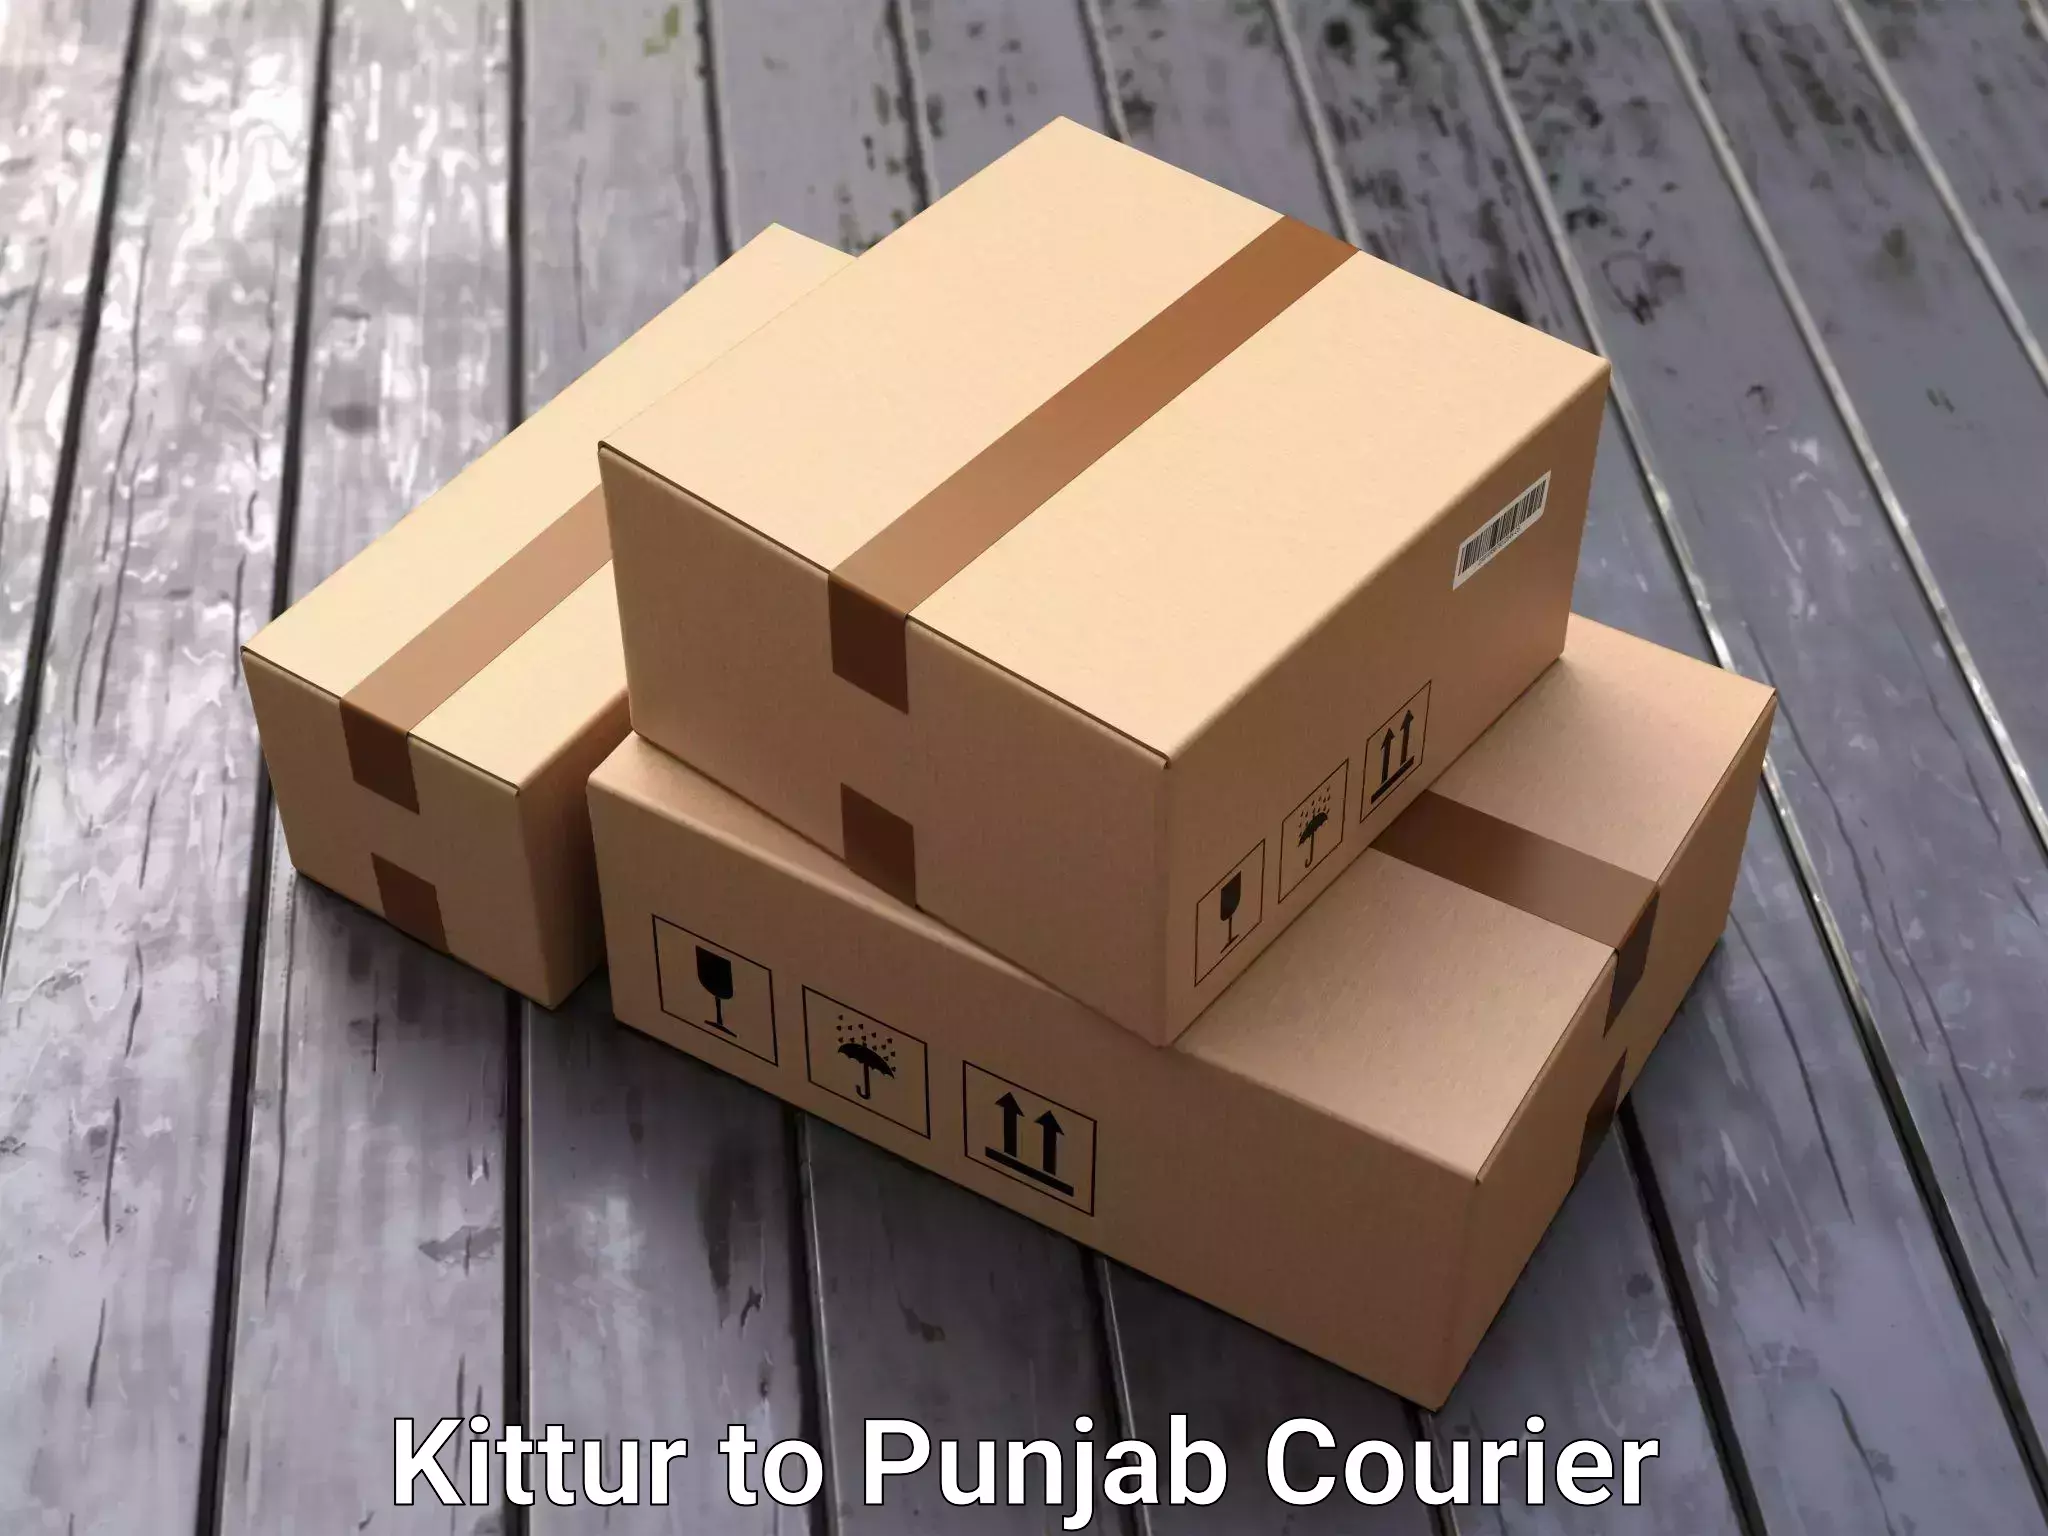 Furniture delivery service Kittur to Giddarbaha